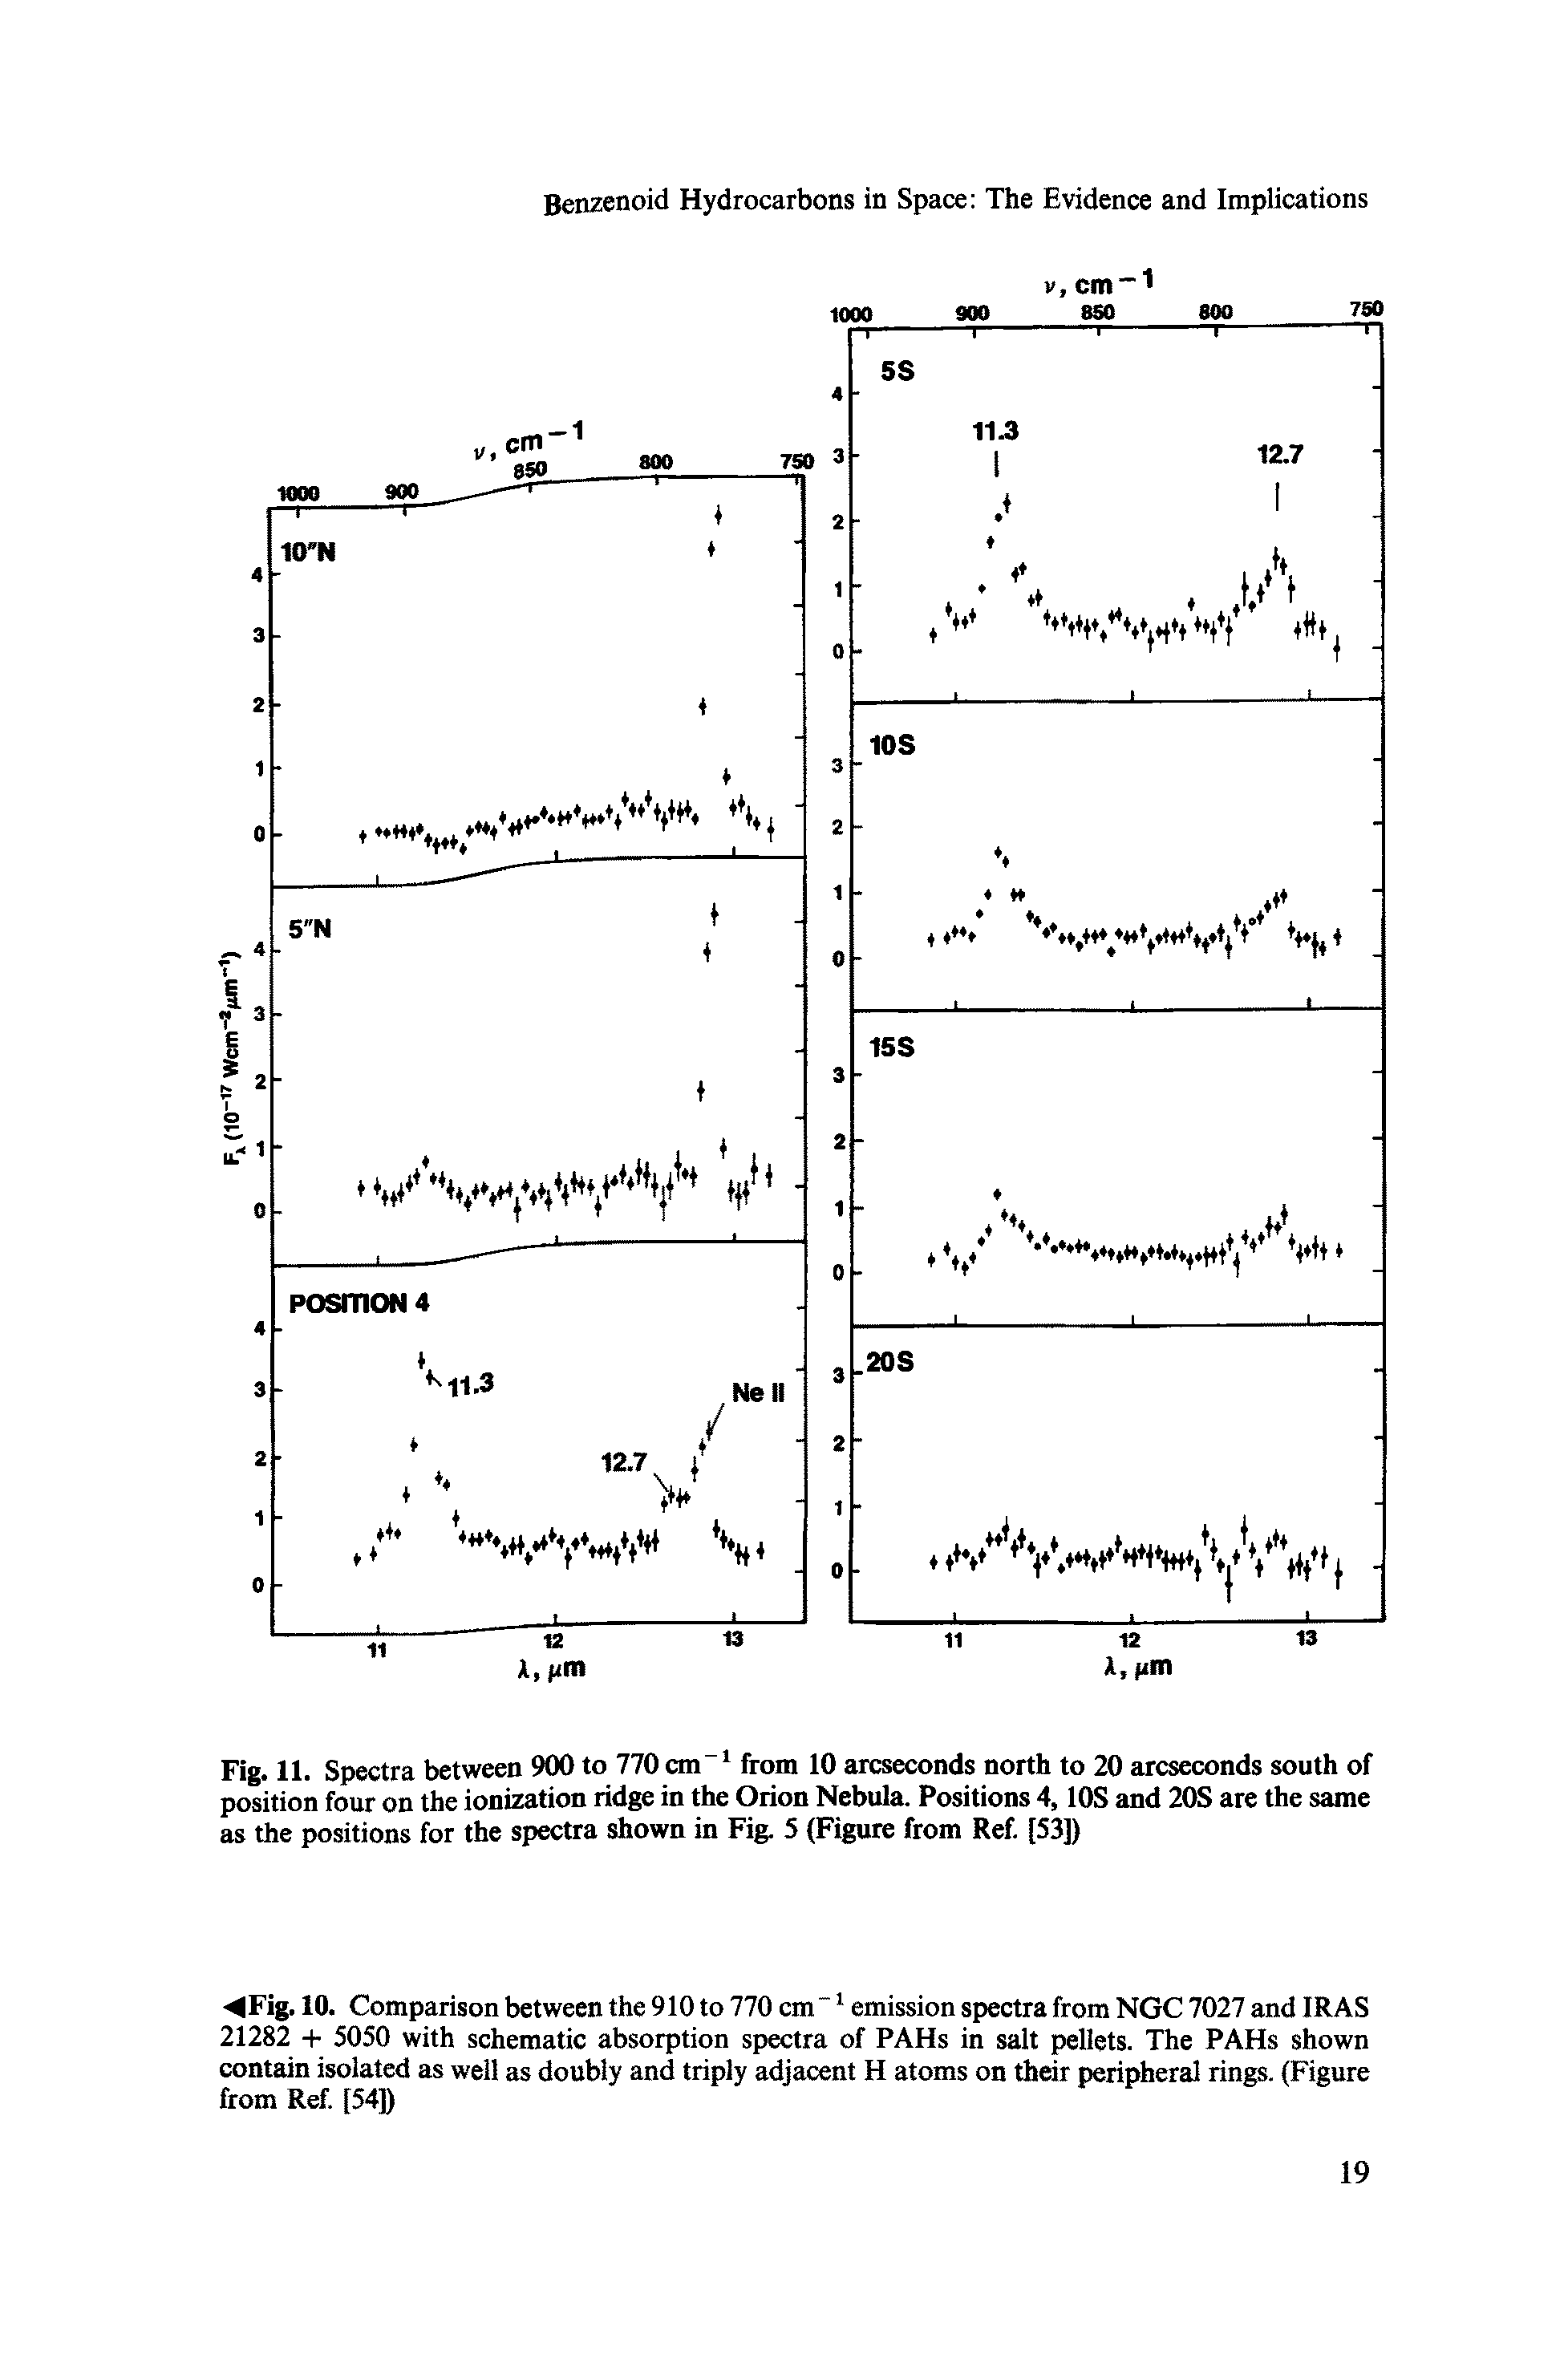 Fig. 11. Spectra between 900 to 770 cm-1 from 10 arcseconds north to 20 arcseconds south of position four on the ionization ridge in the Orion Nebula. Positions 4,10S and 20S are the same as the positions for the spectra shown in Fig. 5 (Figure from Ref. [53])...